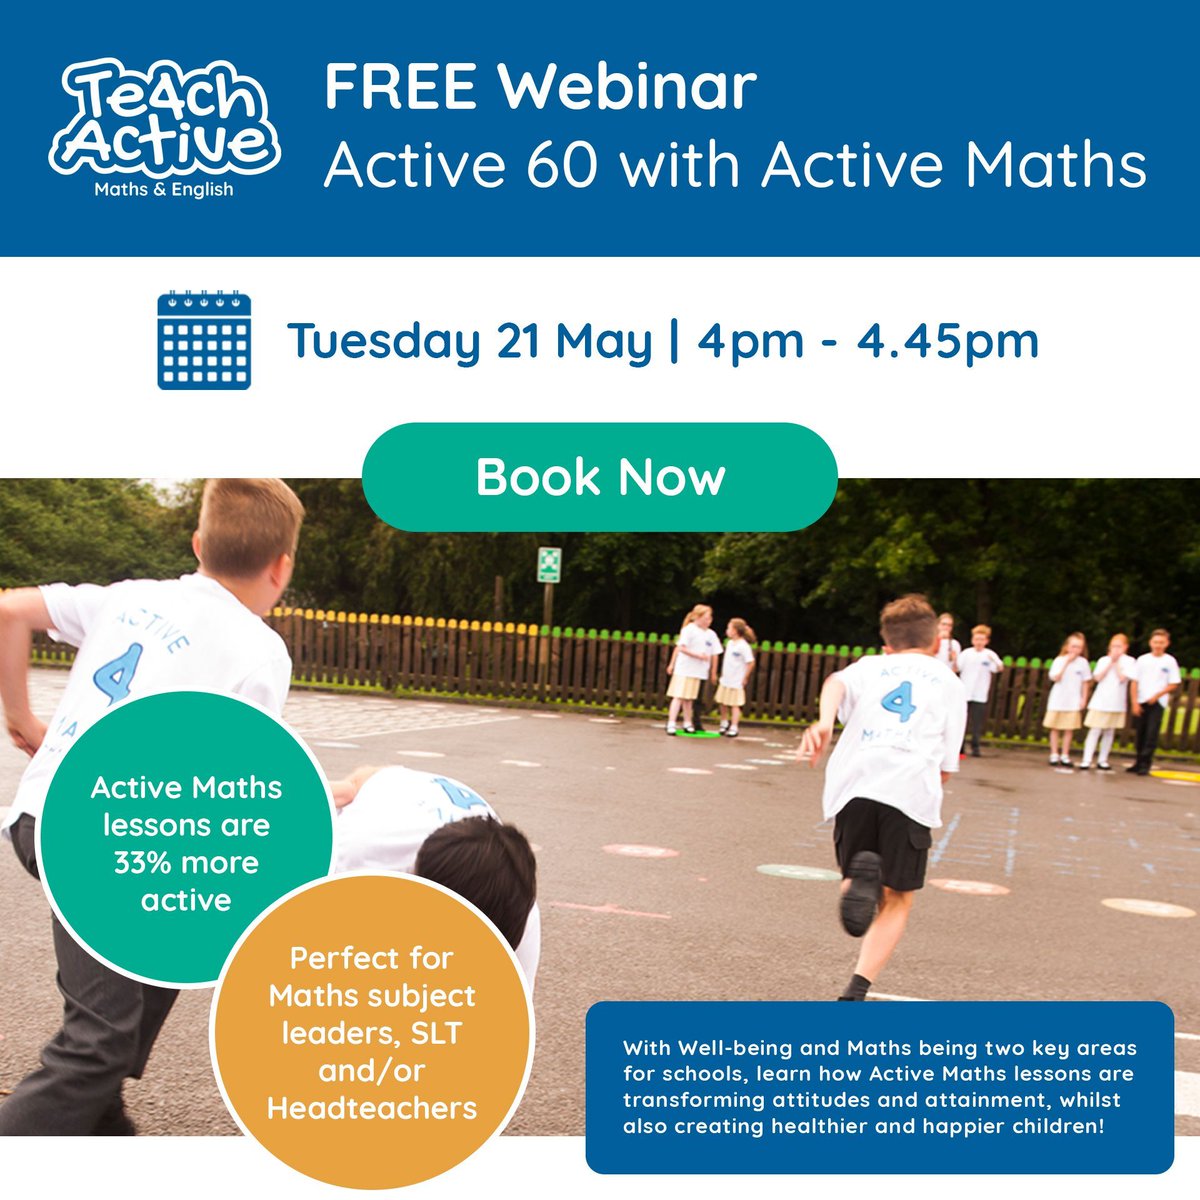 🌟 Join us for our latest webinar: Active 60 with Active Maths! With Well-being and Maths being two key areas for schools, learn how #ActiveMaths lessons are transforming attitudes and attainment, whilst also creating healthier and happier children! 🔗 buff.ly/4aP44LS